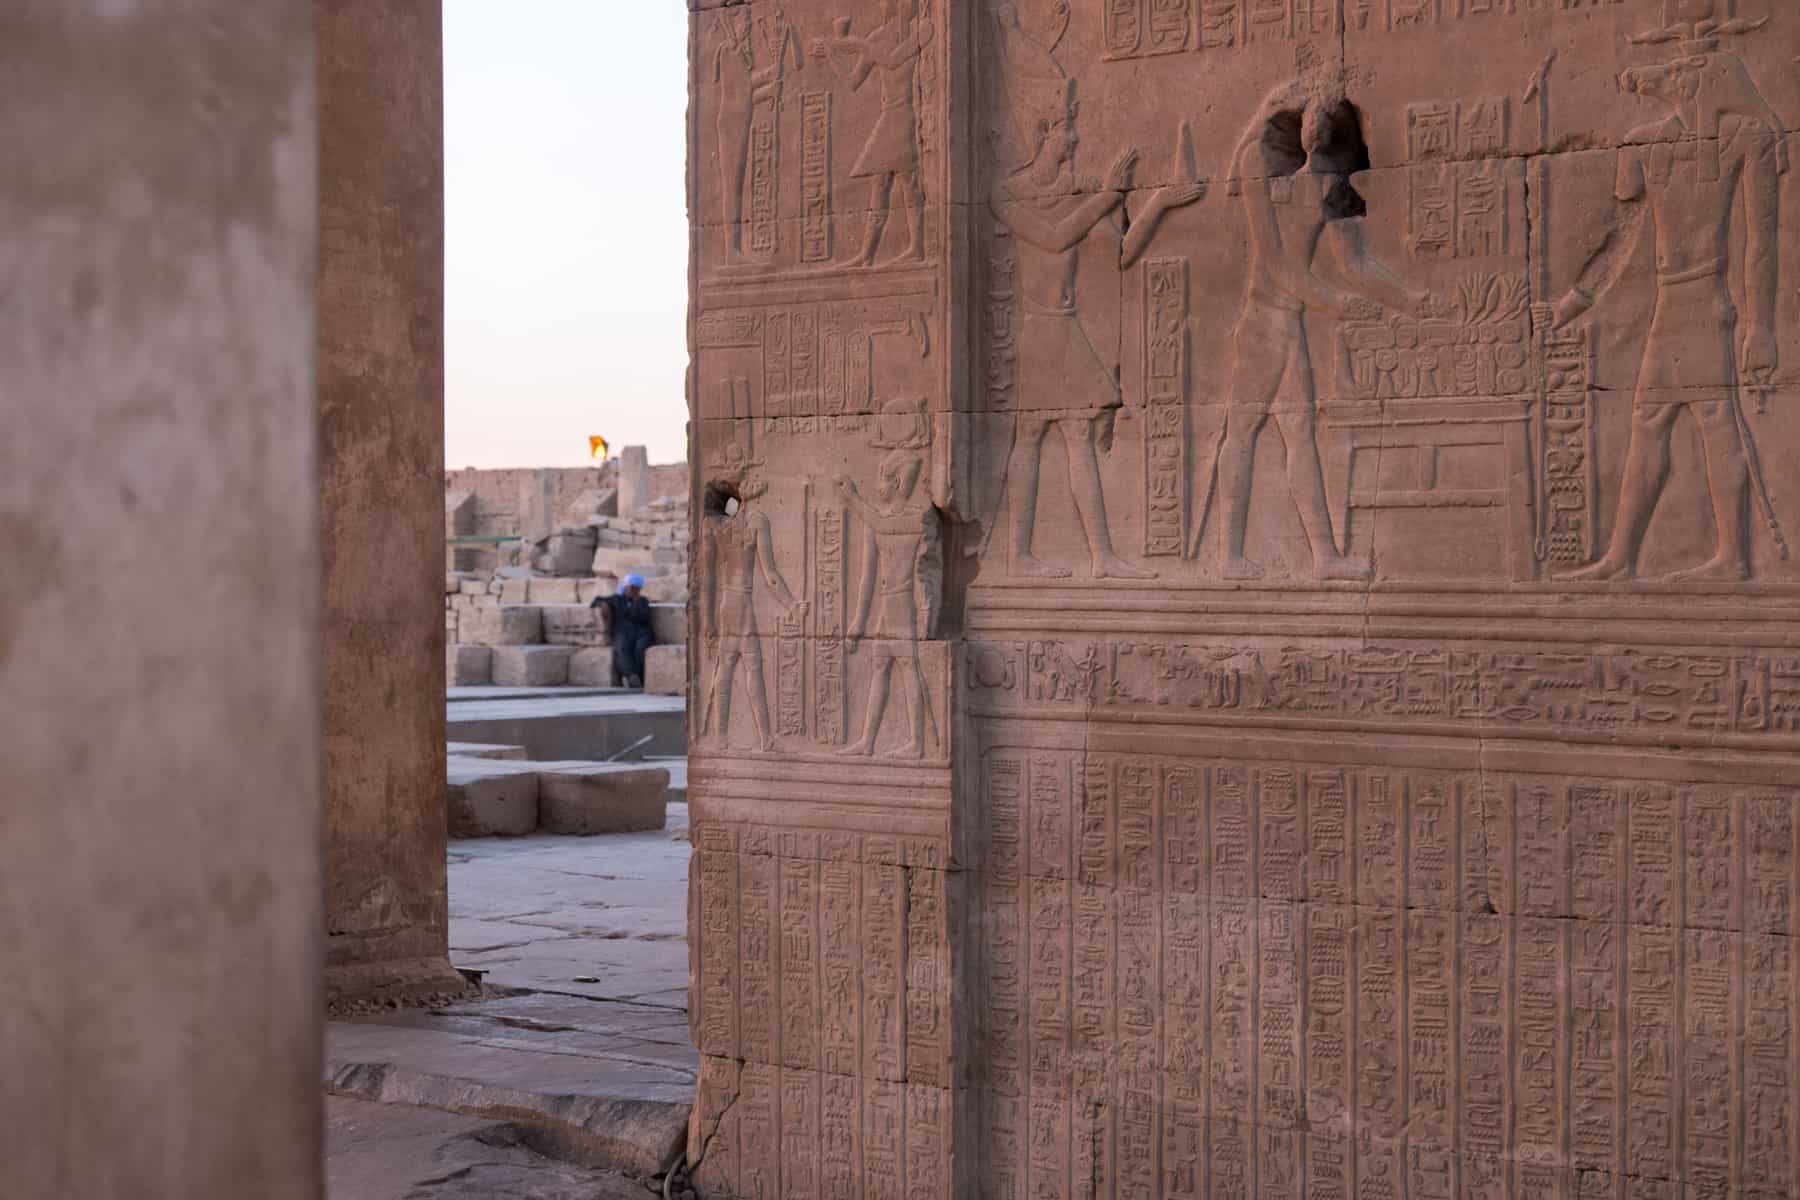 Carved pictures tell stories of Ancient Egypt on the red walls of Kom Ombo Temple in Egypt